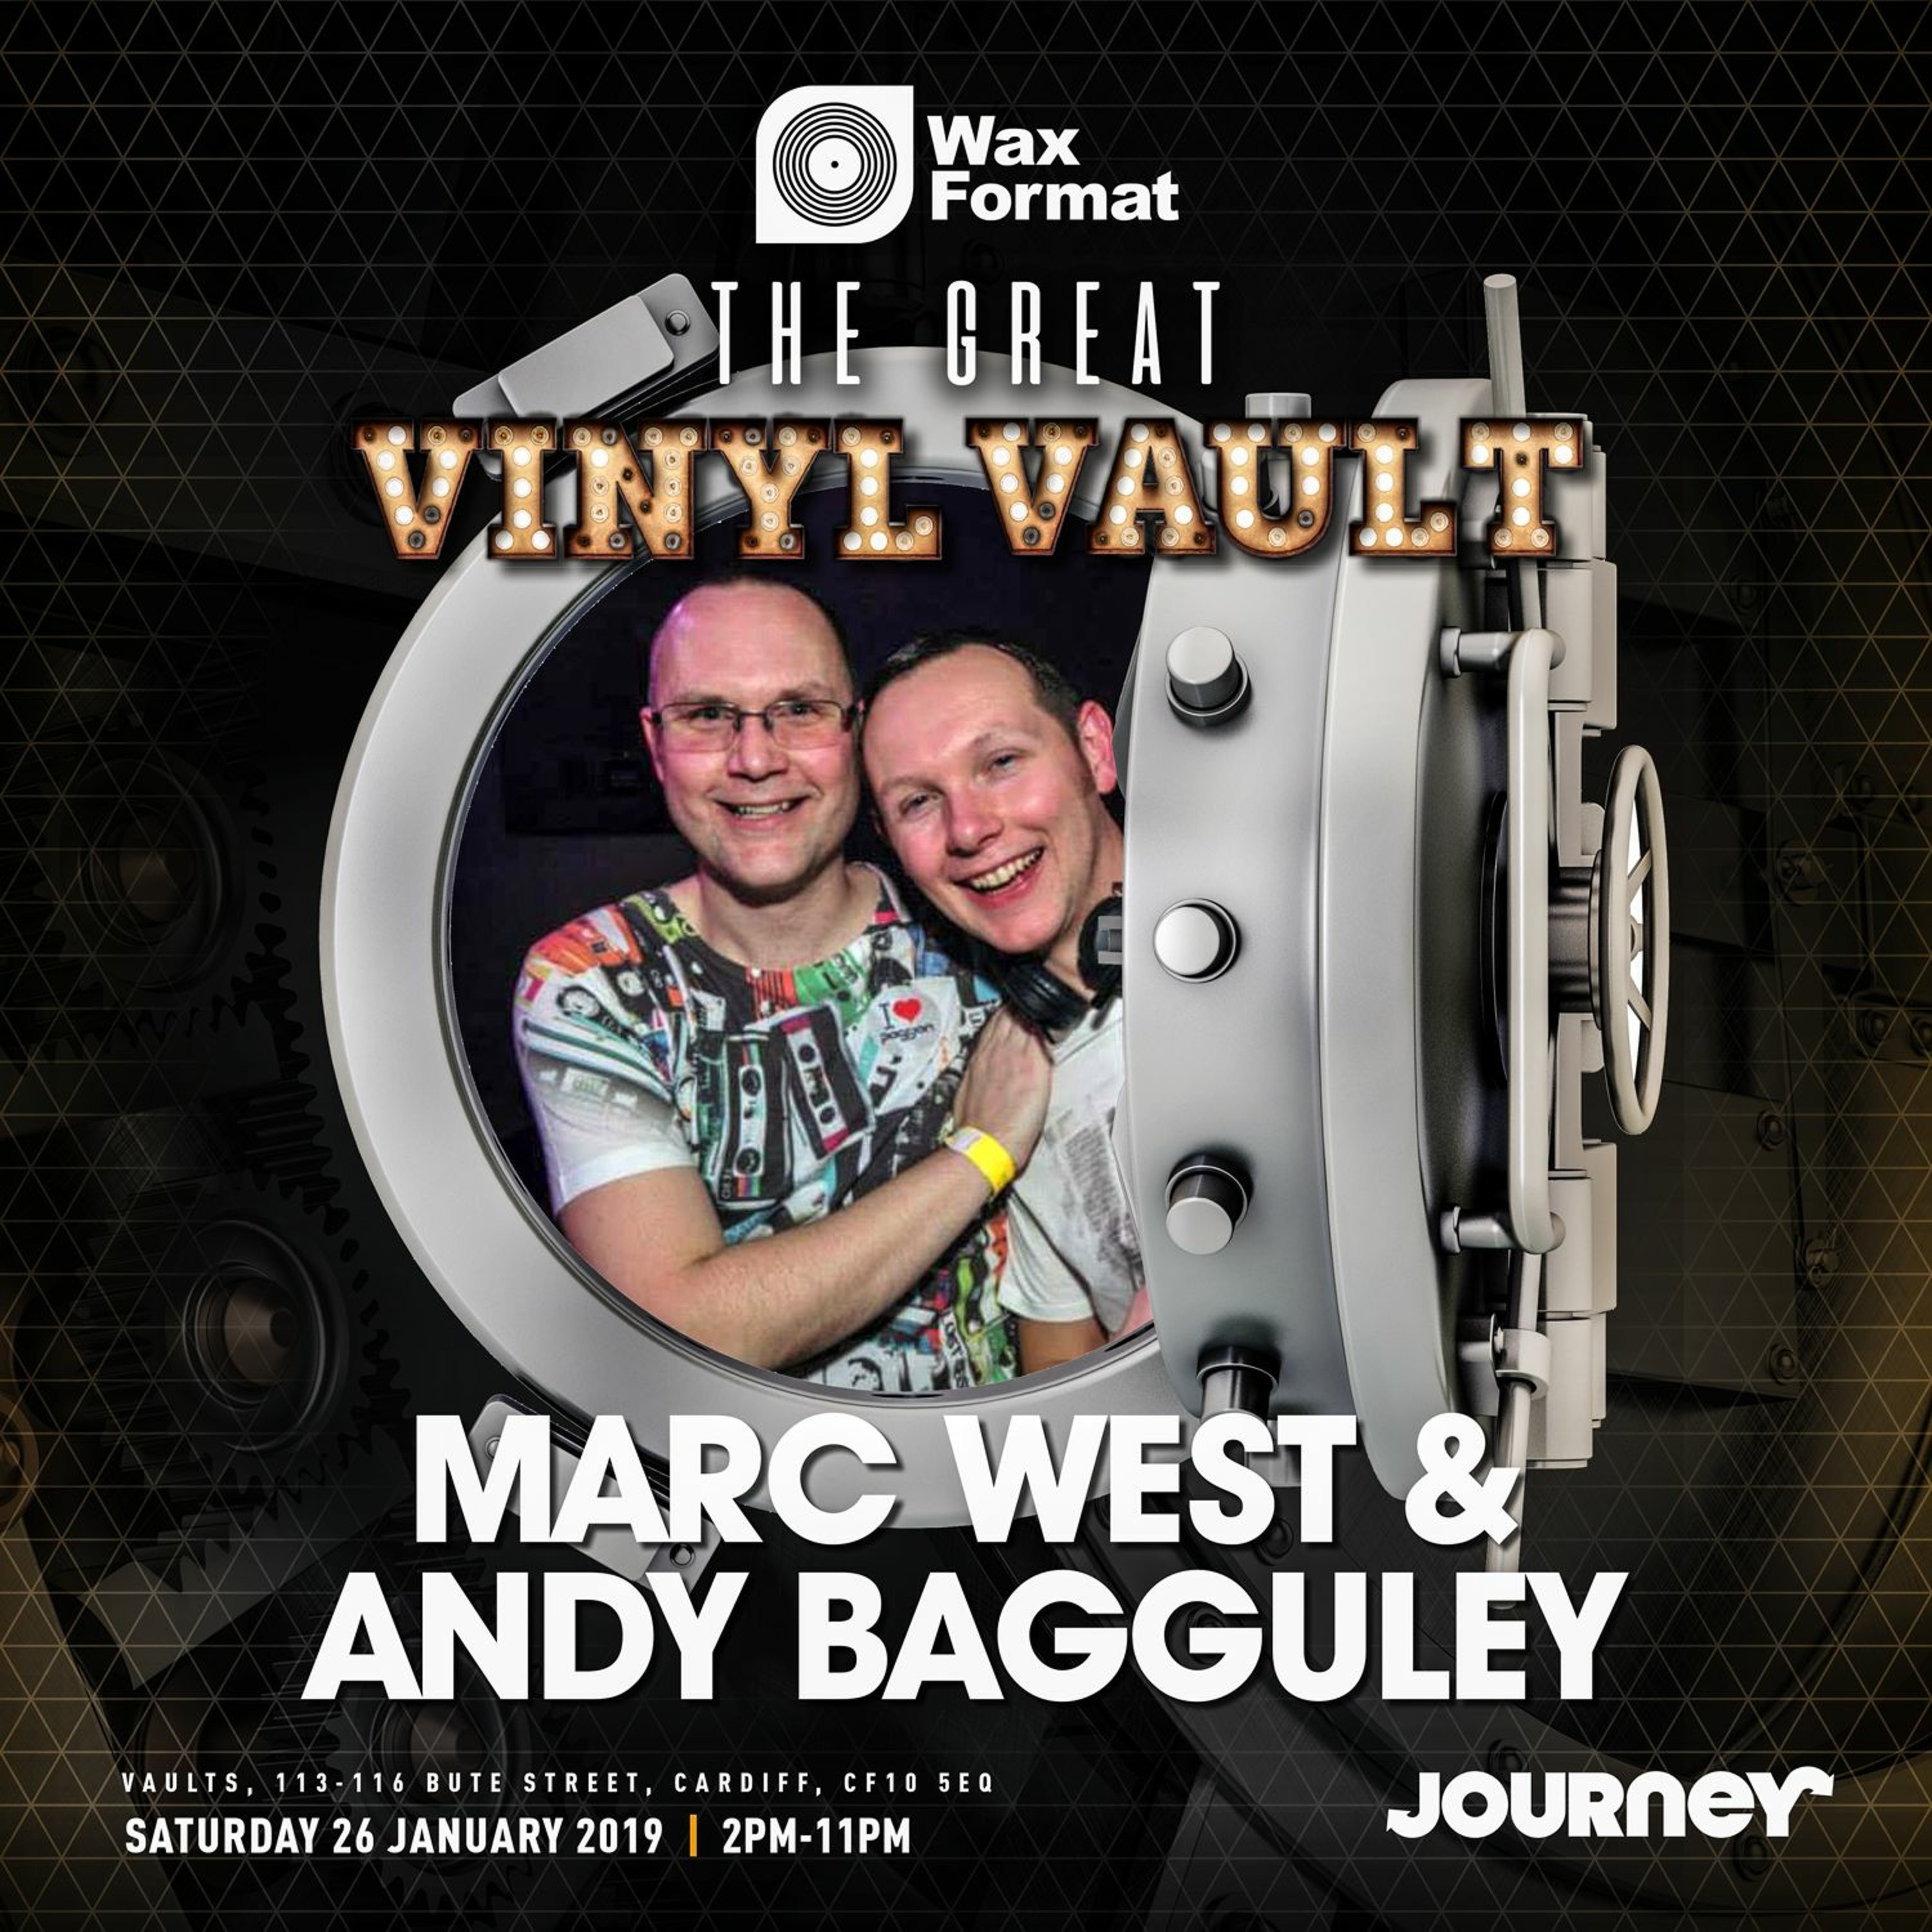 Marc West & Andy Bagguley Live From Wax Format Main Room @ Vaults Cardiff  26 Jan 2019 – Trance Journey Cardiff – Podcast – Podtail